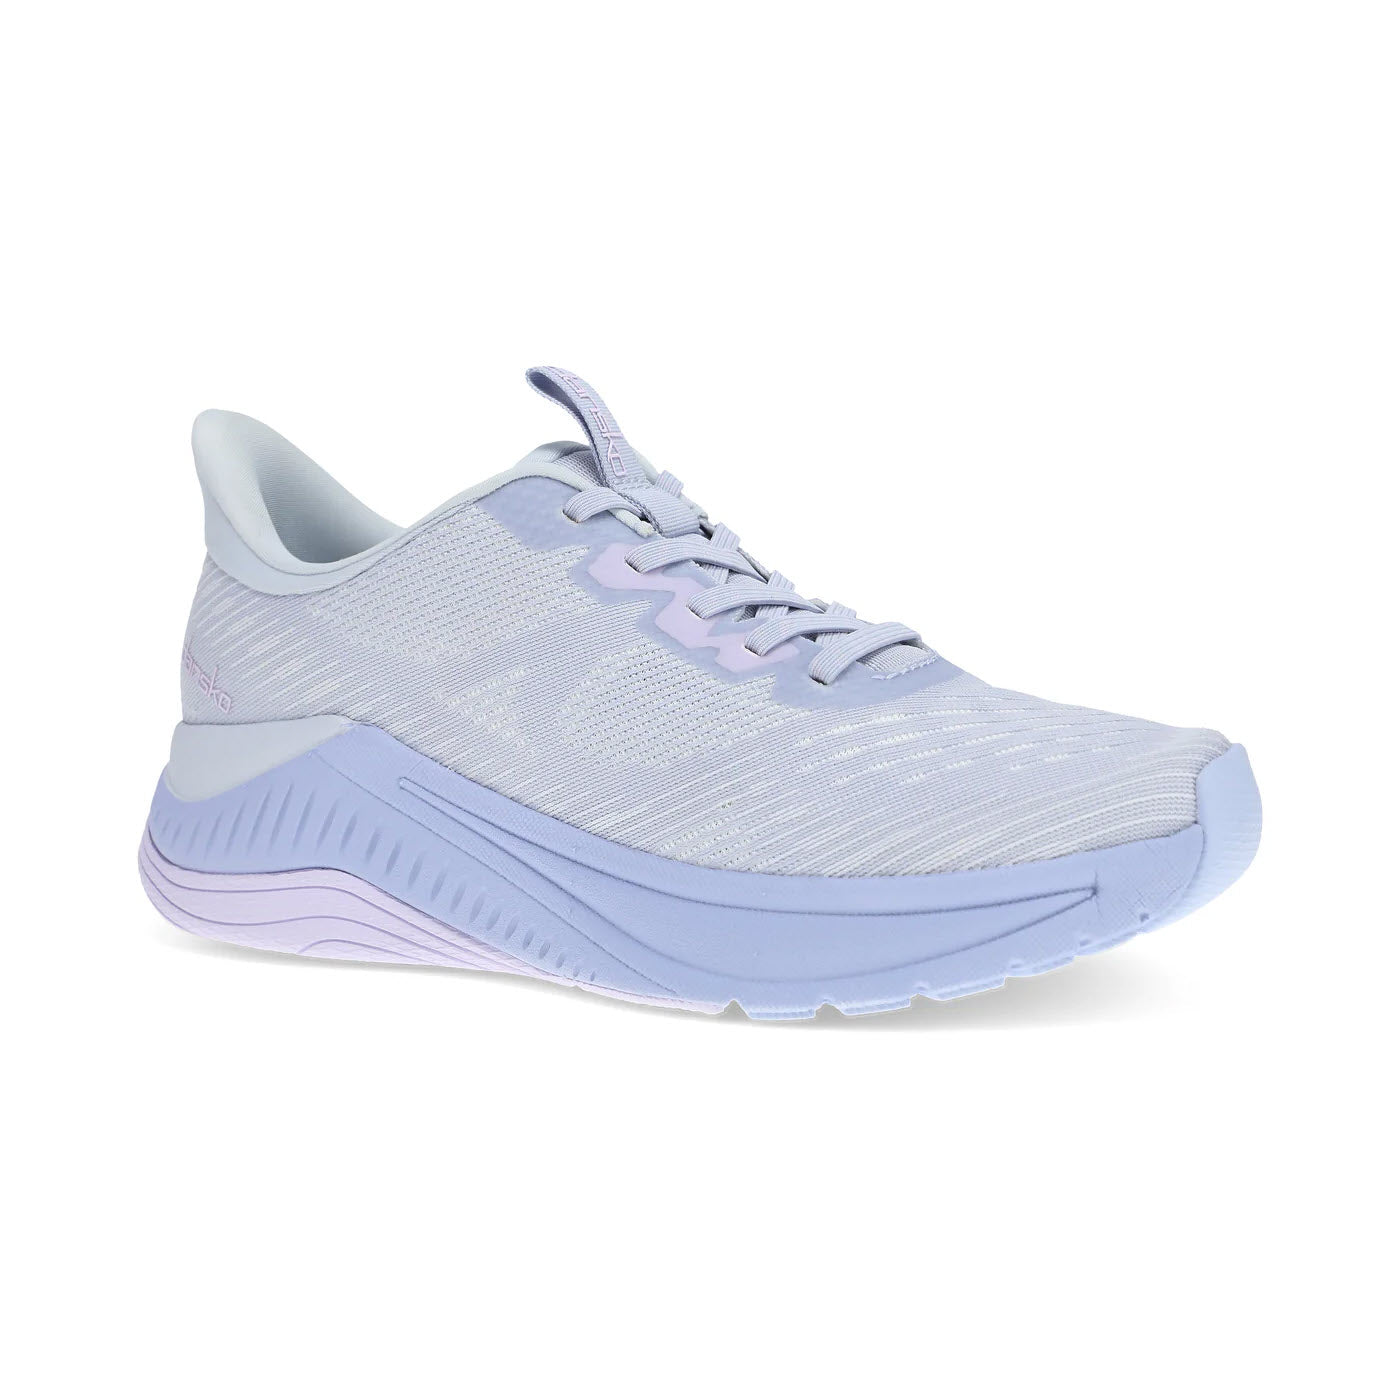 A single light grey and lavender Dansko PEONY LILAC - WOMENS athletic shoe on a white background.